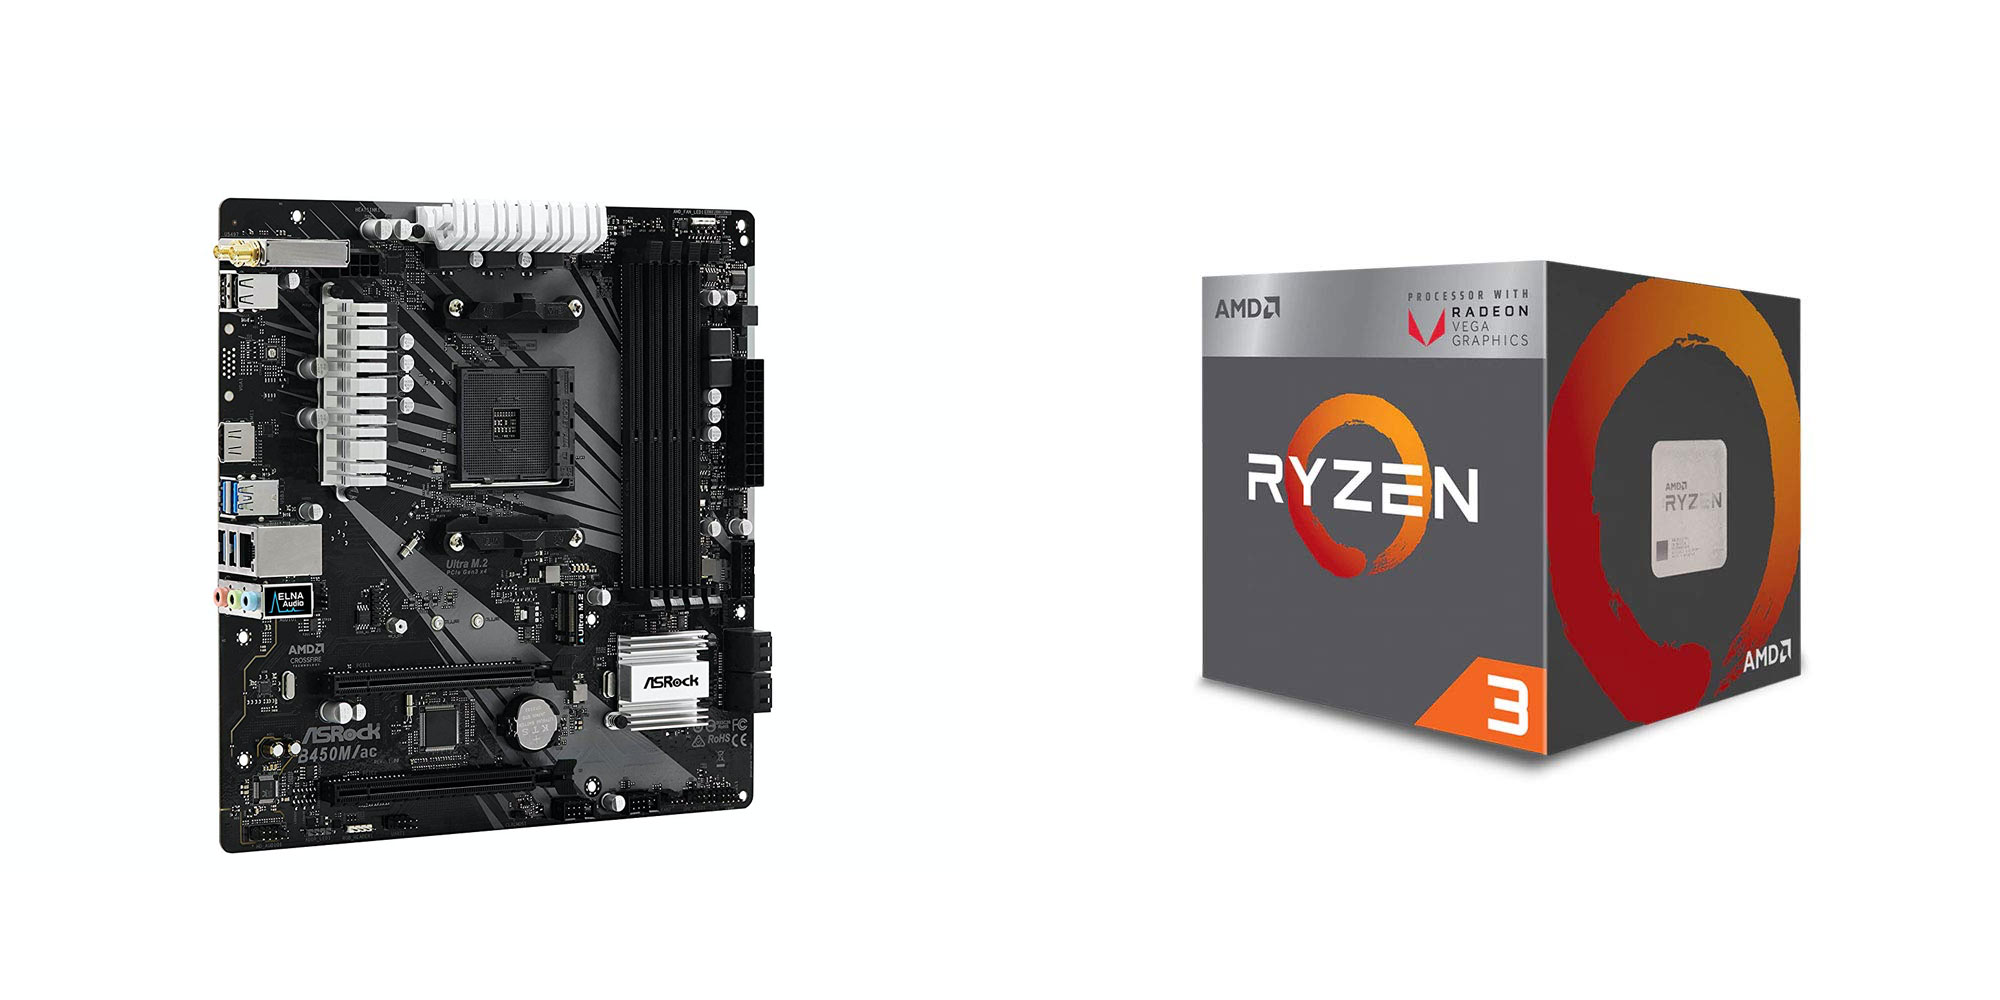 Enter the PC gaming realm w/ AMD Ryzen 3 + ASRock motherboard: $112535